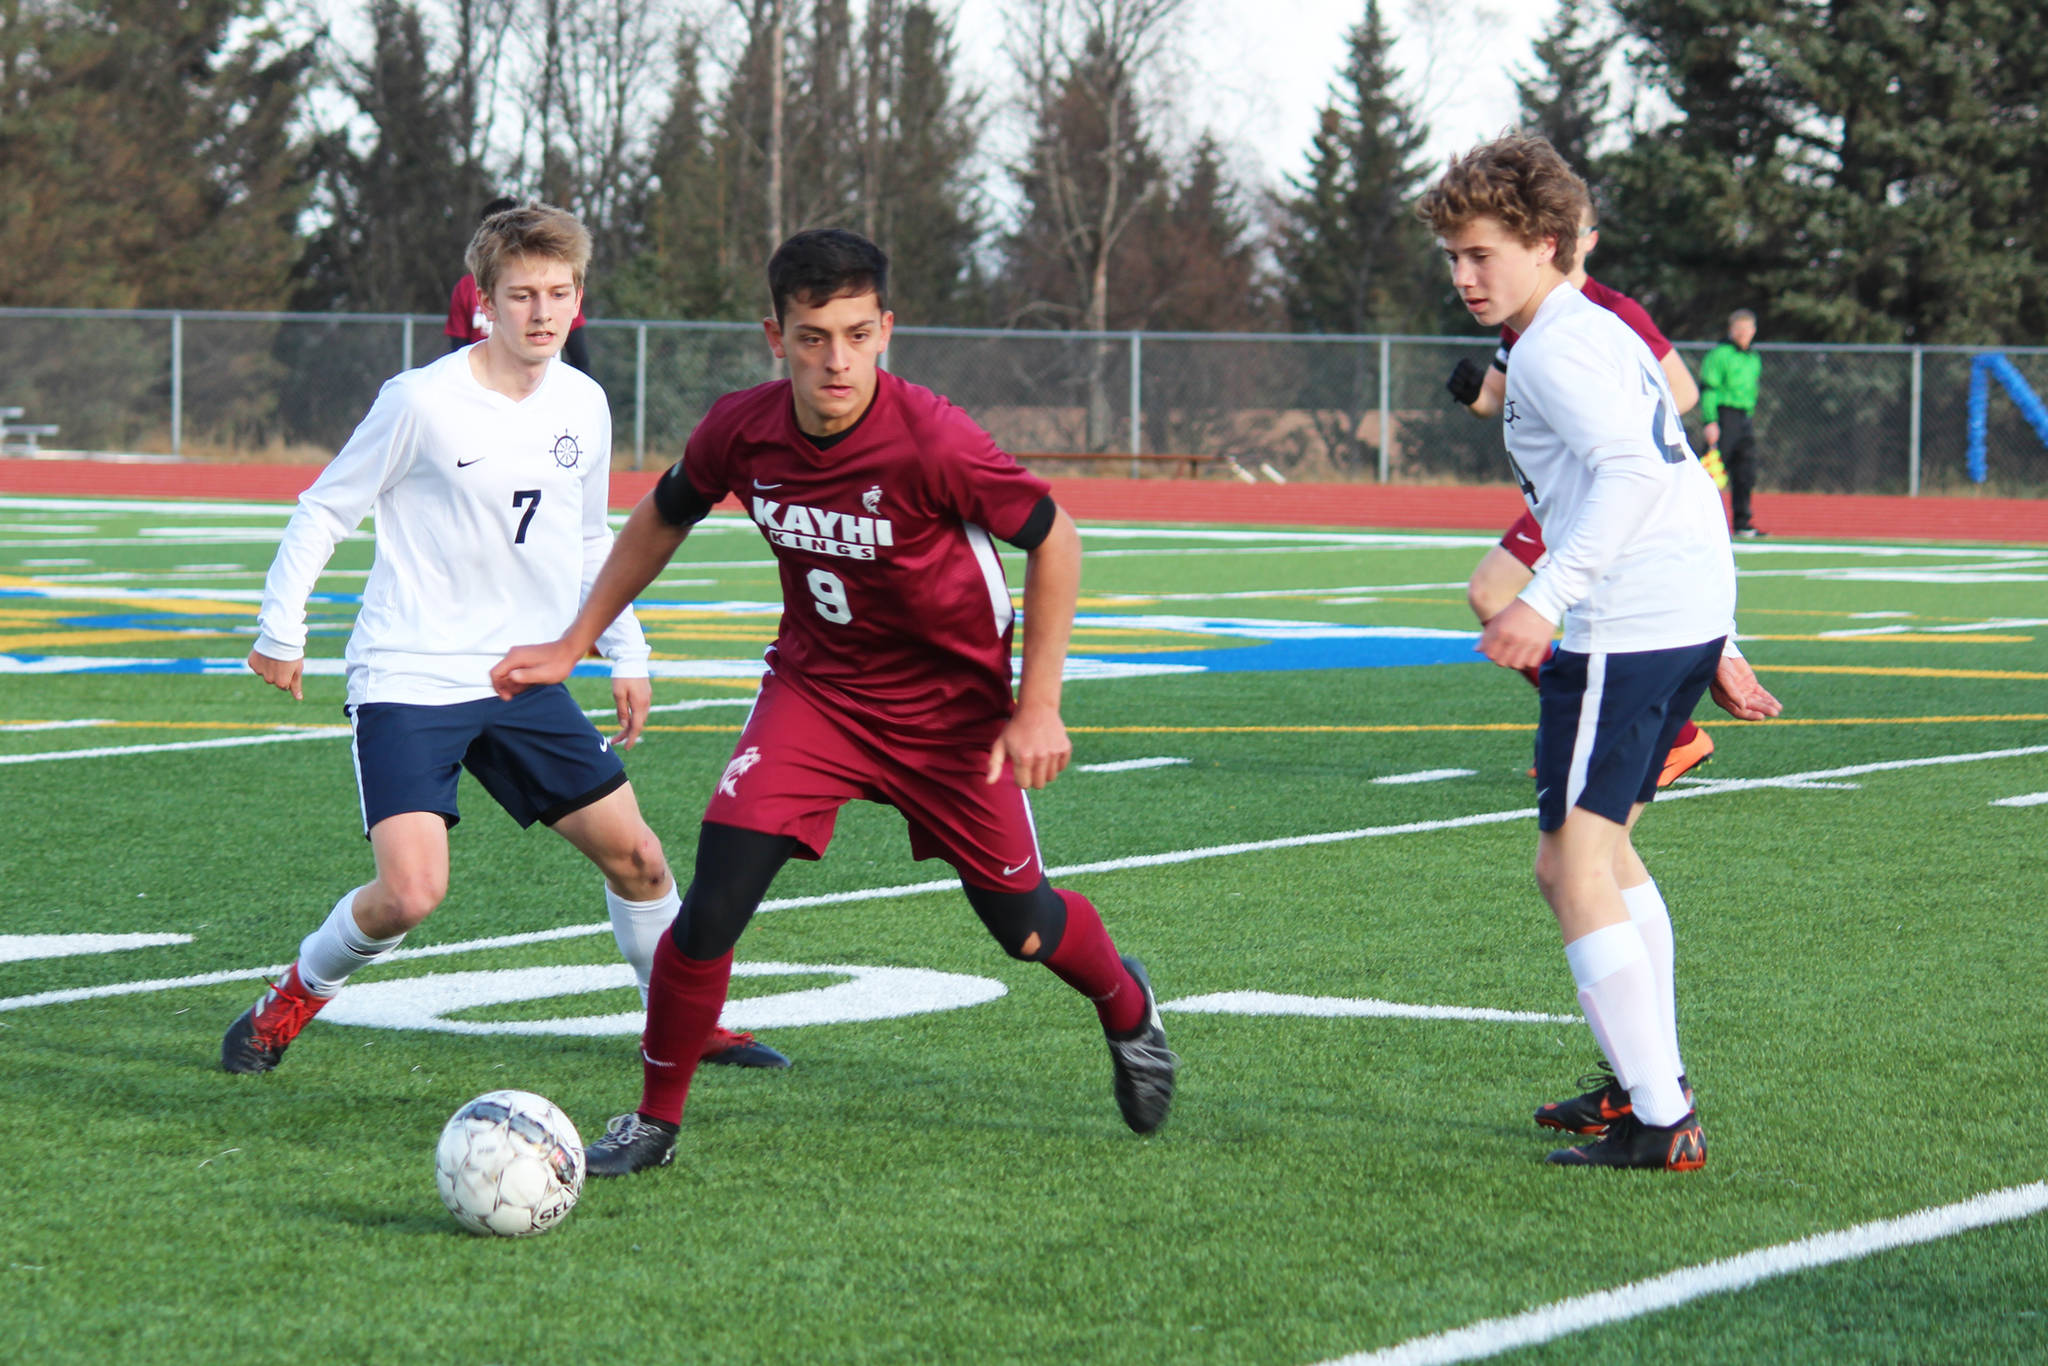 Ketchikan’s Dawson Daniels looks for a place to take the ball while Homer’s Simon Dye, left, and Austin Shafford, right, close in during their game Friday, May 4, 2018 at Homer High School in Homer, Alaska. Ketchikan won the match 1-0. (Photo by Megan Pacer/Homer News)